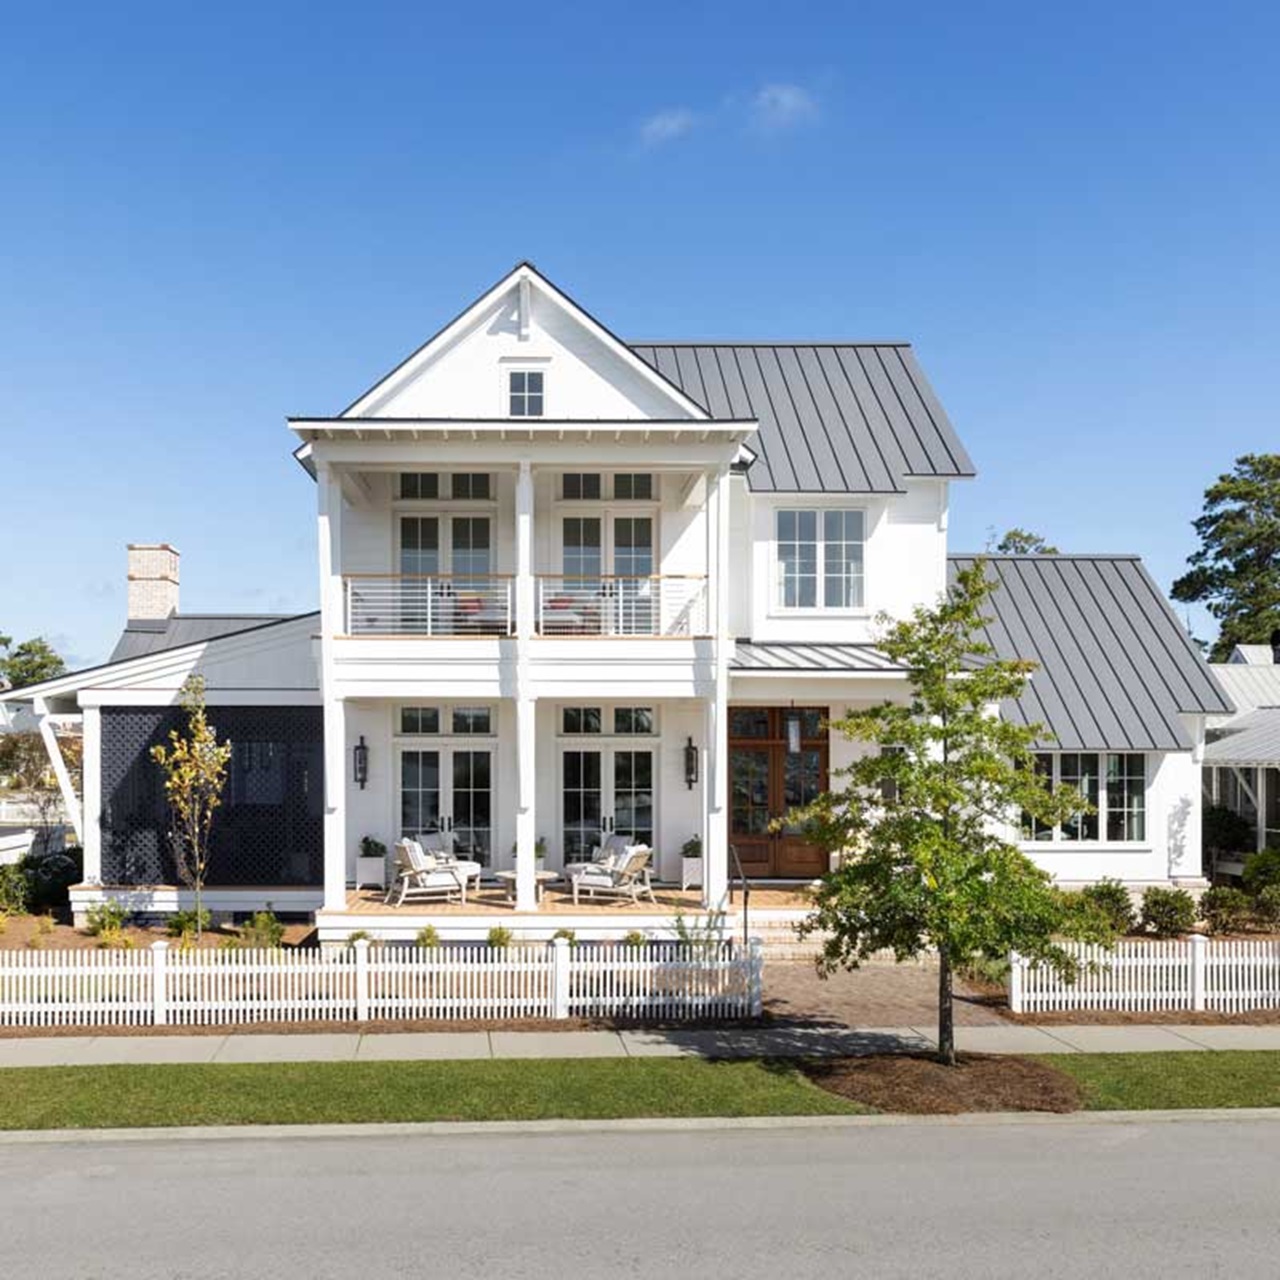 Exterior of white coastal home with white fence and white marvin elevate windows